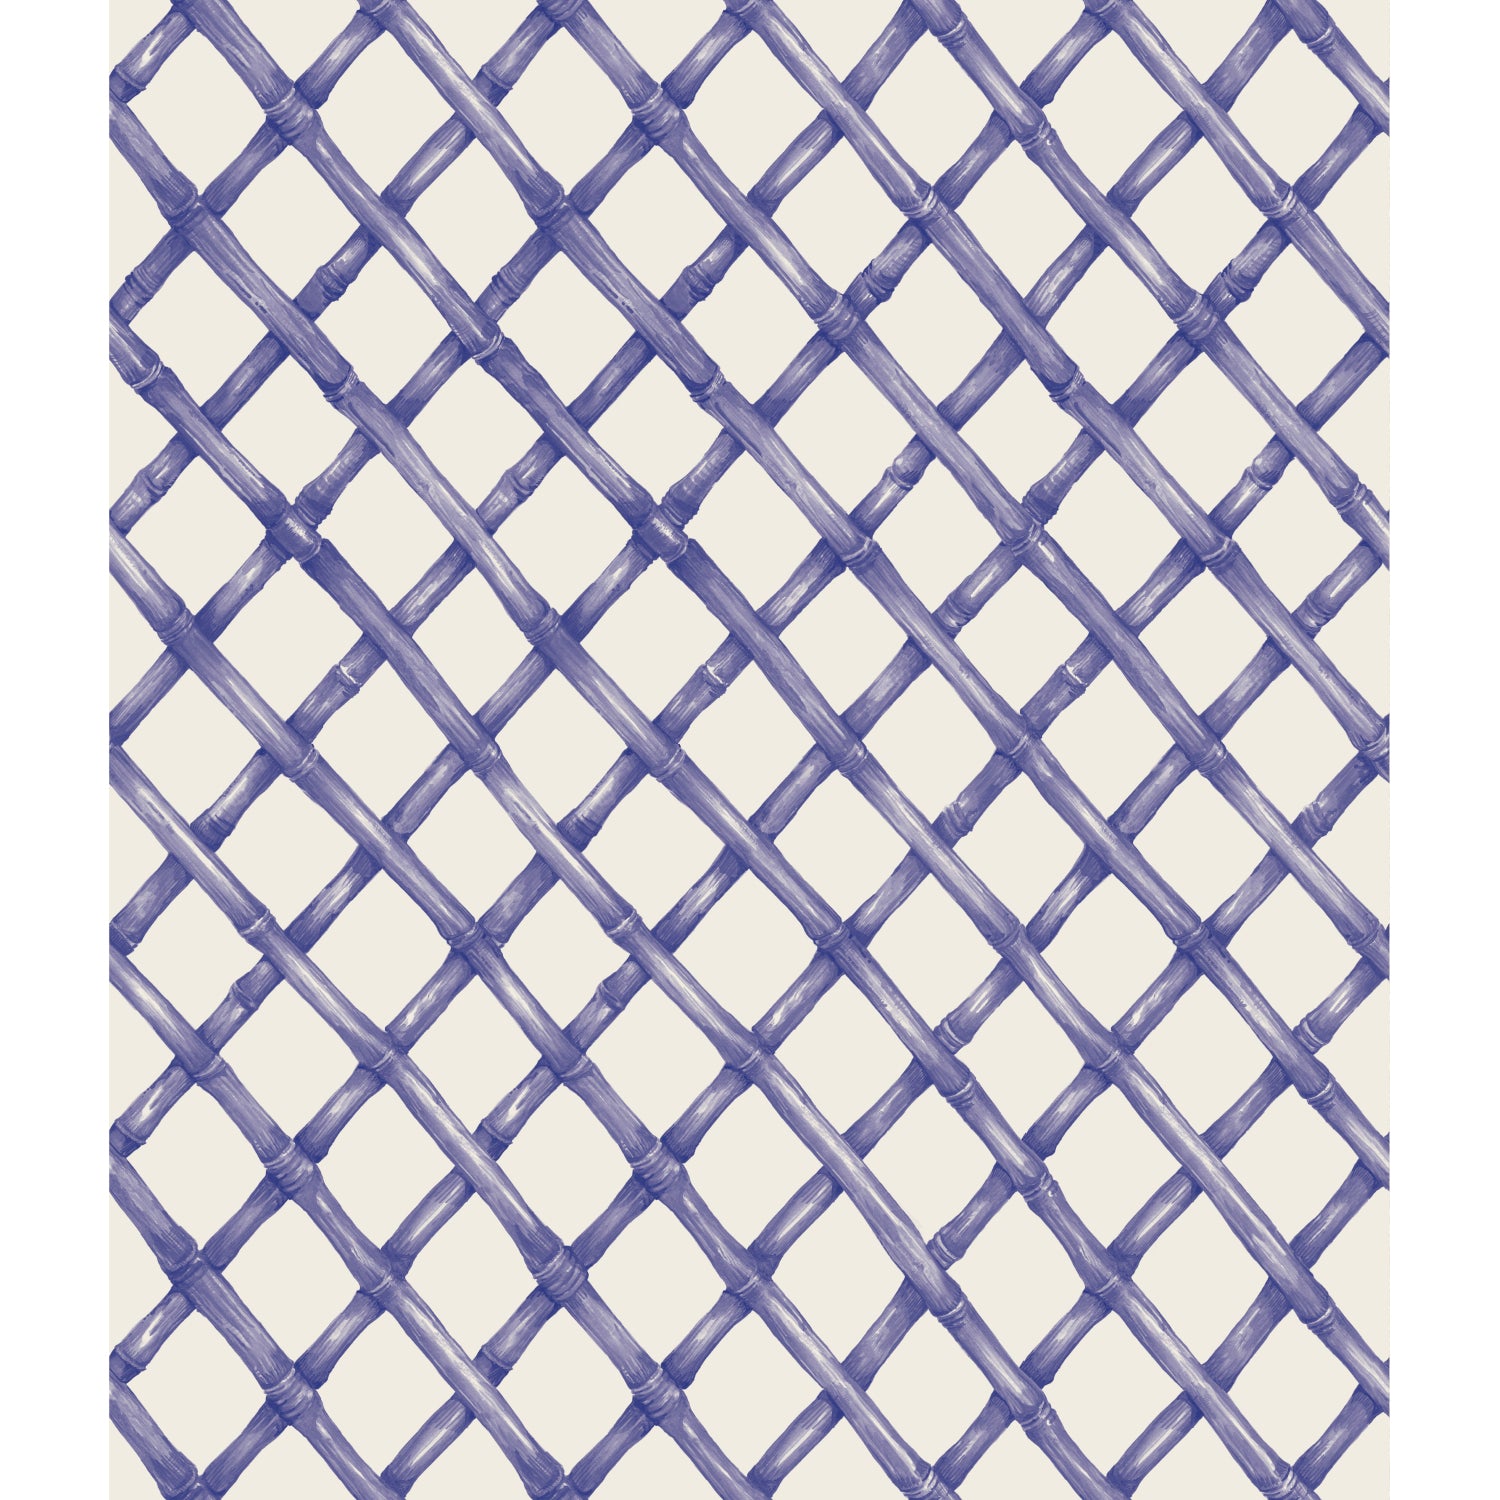 Hester &amp; Cook Blue Lattice Wallpaper featuring a diagonal crisscross pattern with lines on a light background, designed to be mold and mildew resistant.